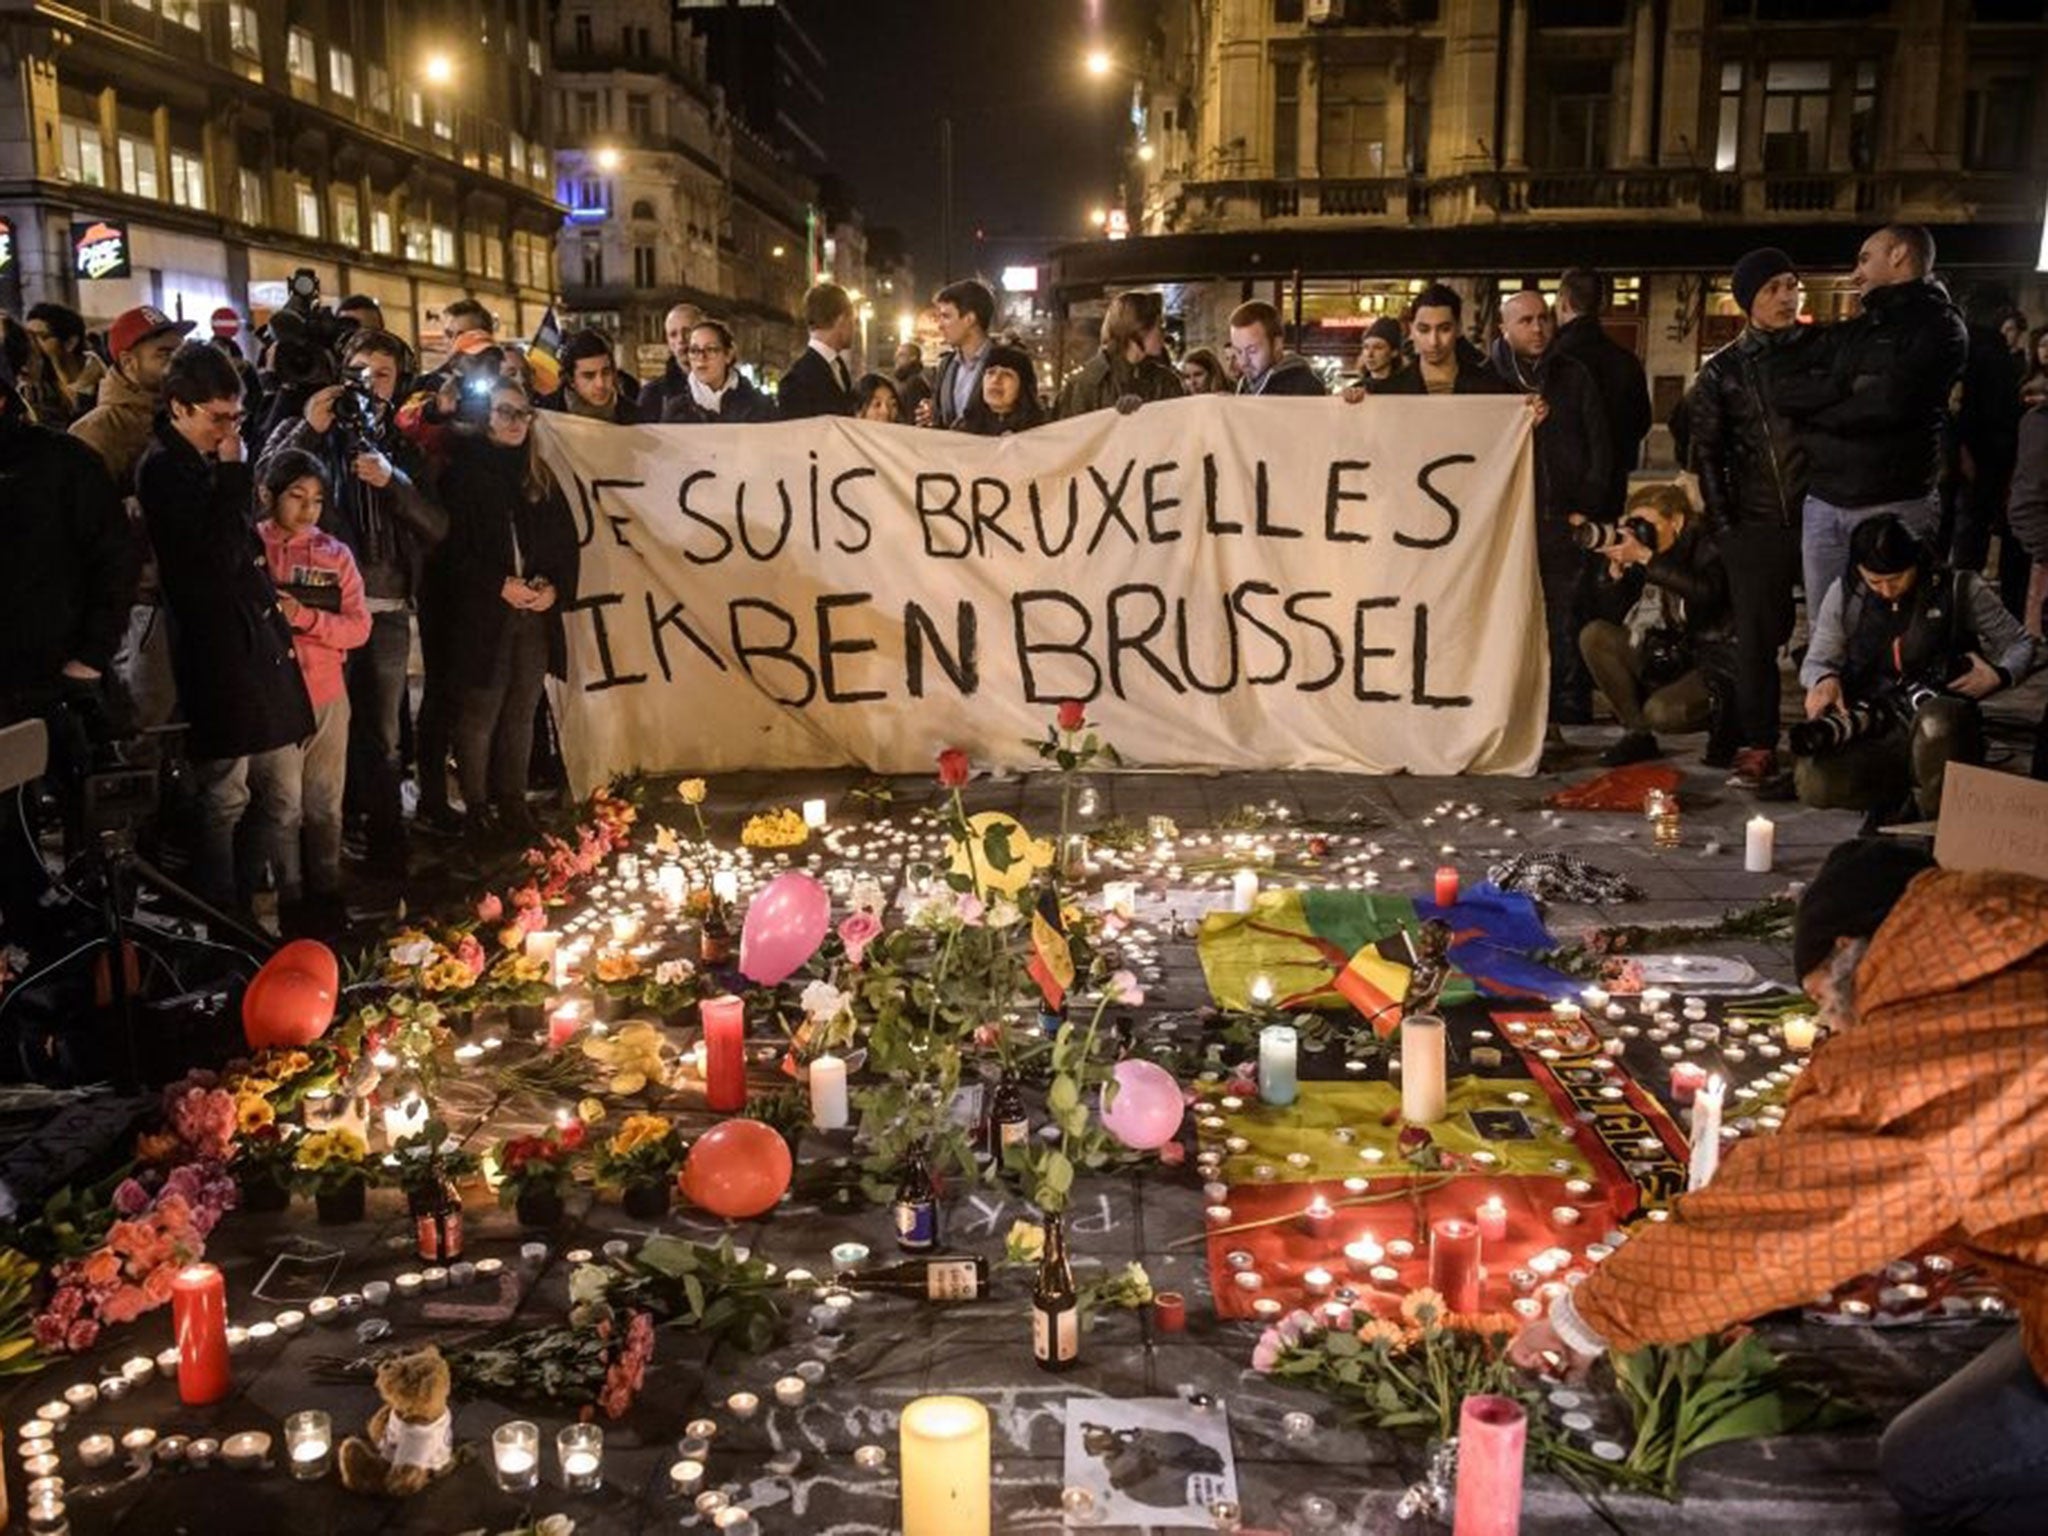 The march was due to take place in Place de la Bourse, which became an improvised memorial of chalk messages, tea lights and flowers after the Brussels attacks